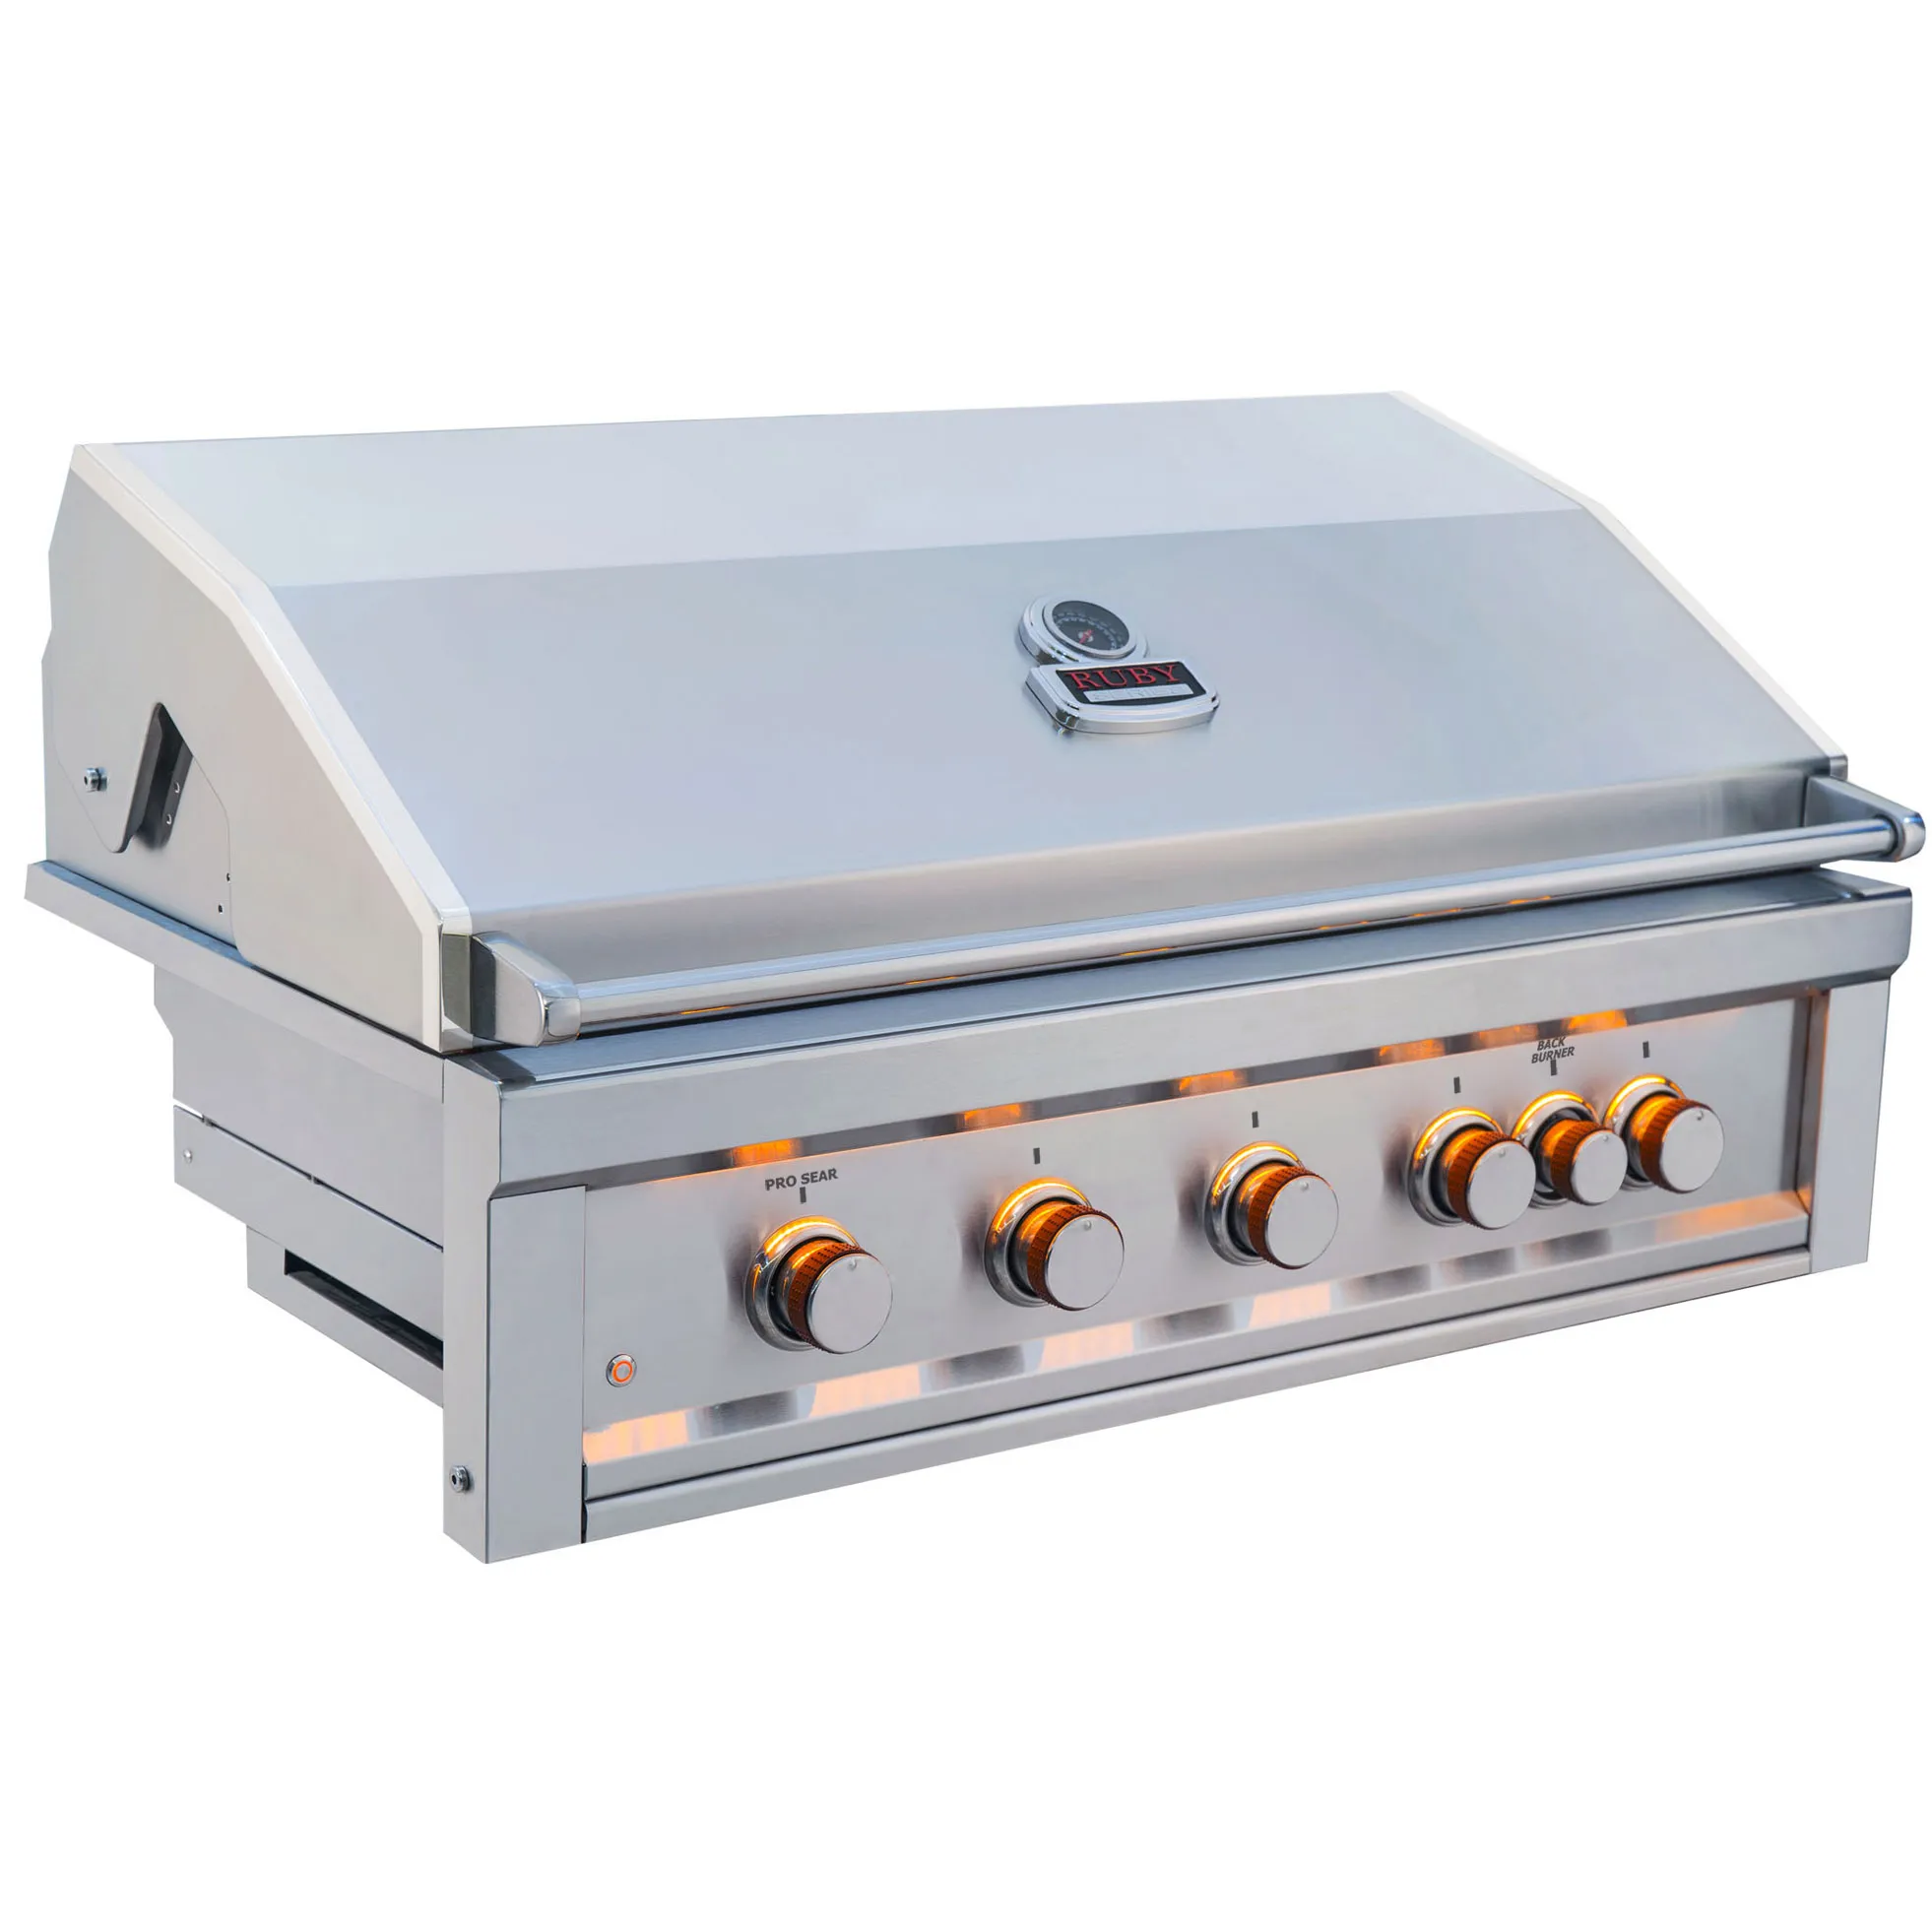 Sunstone Ruby Series 5 Burner Gas BBQ Grill with Infrared